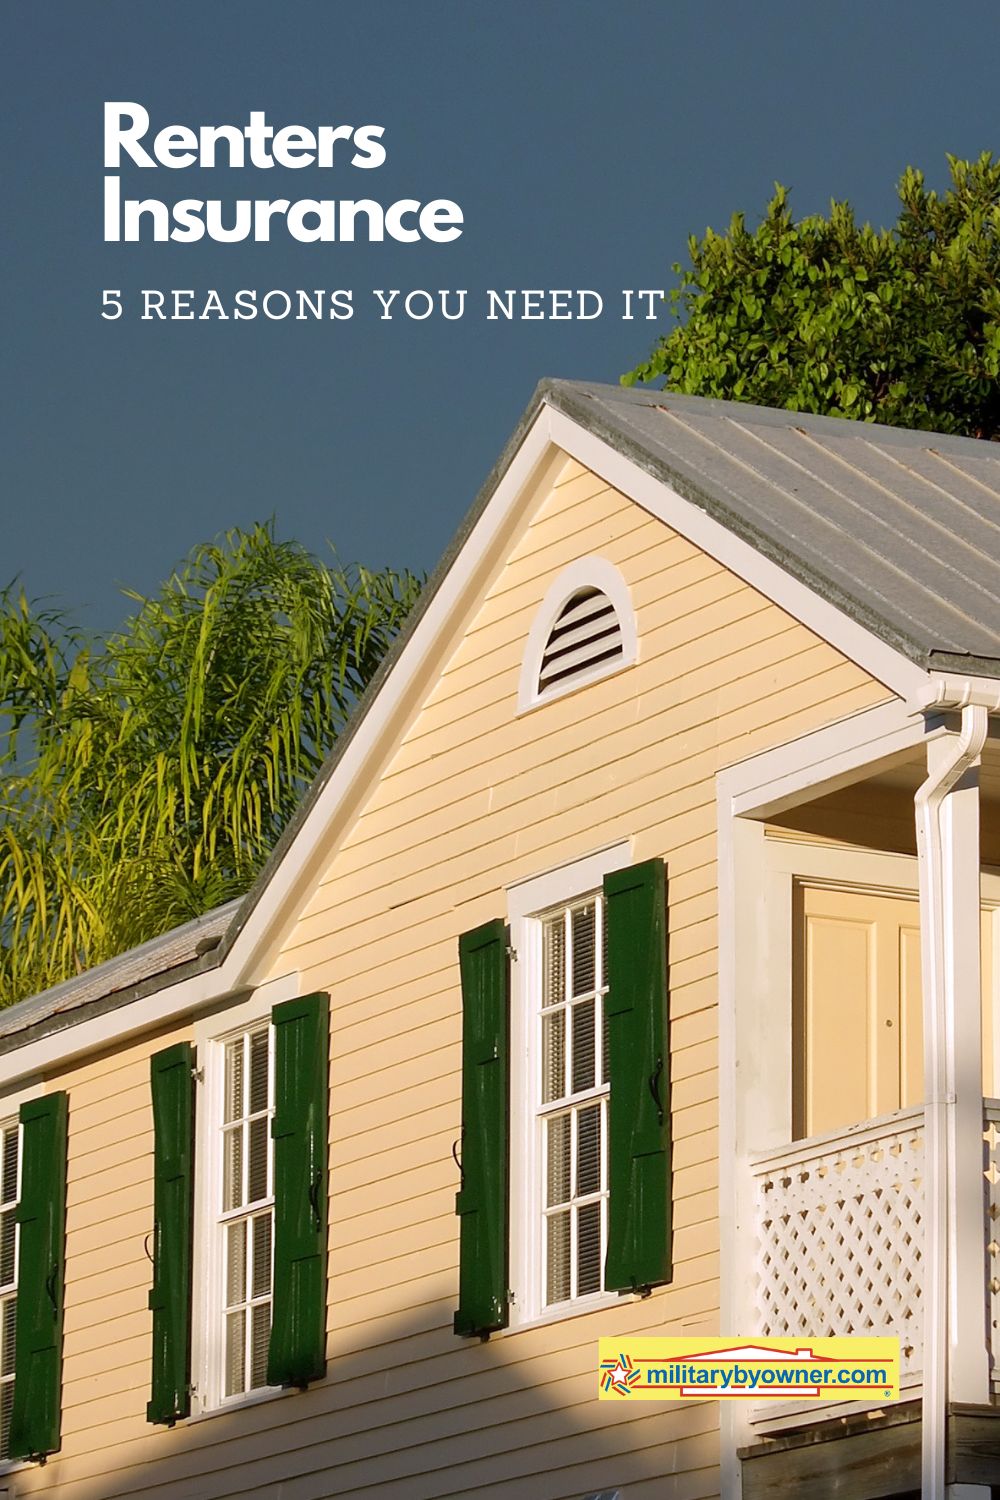 Renters_Insurance__5_reasons_you_need_it